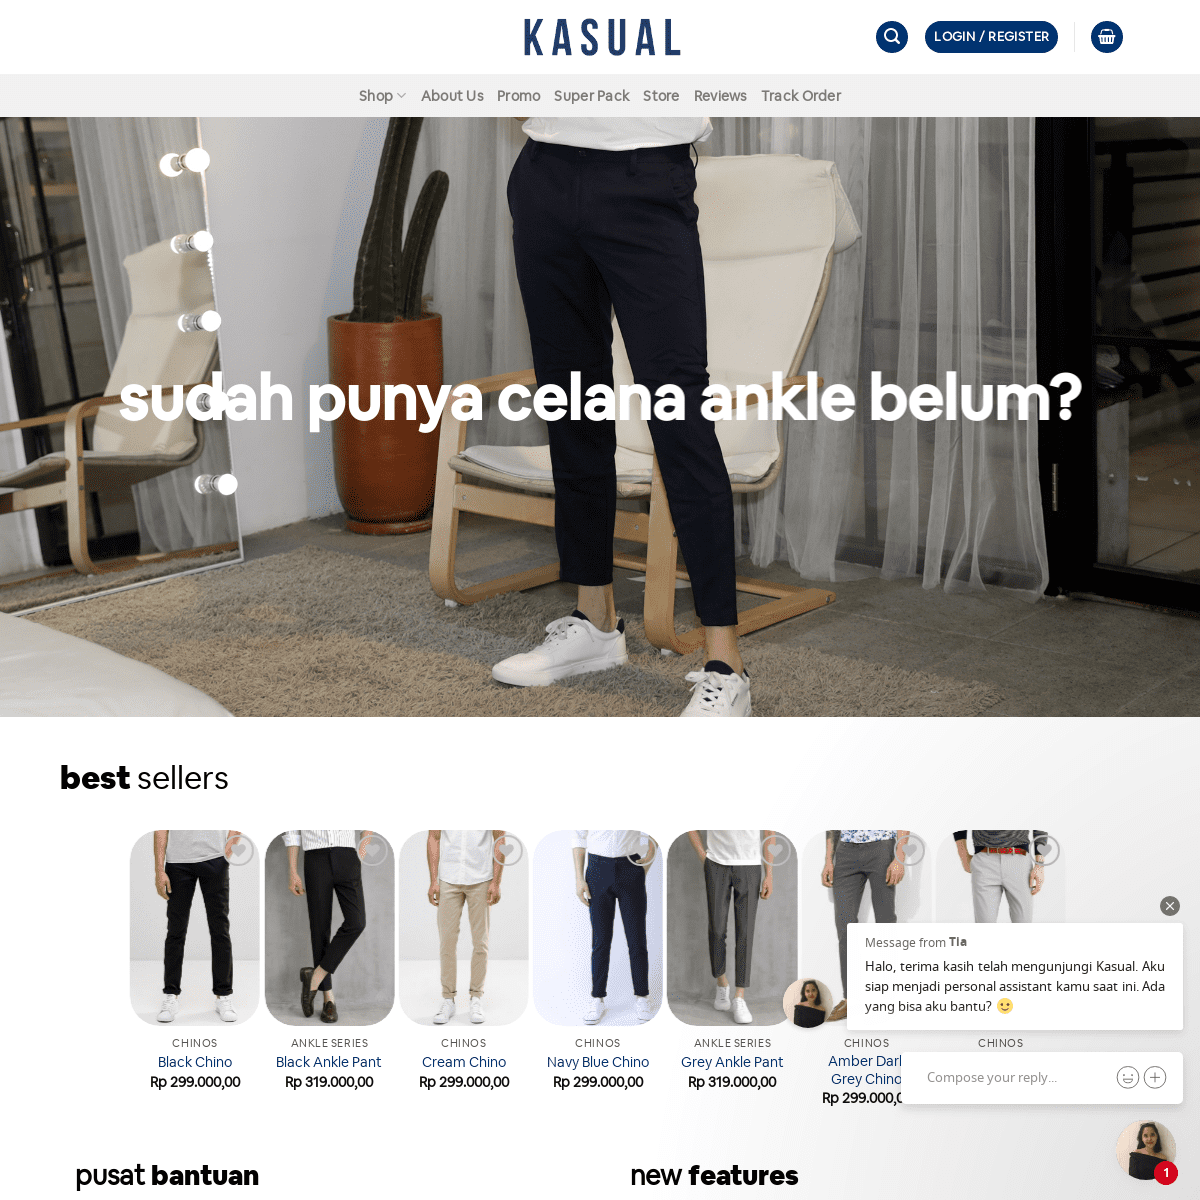 A complete backup of kasual.id